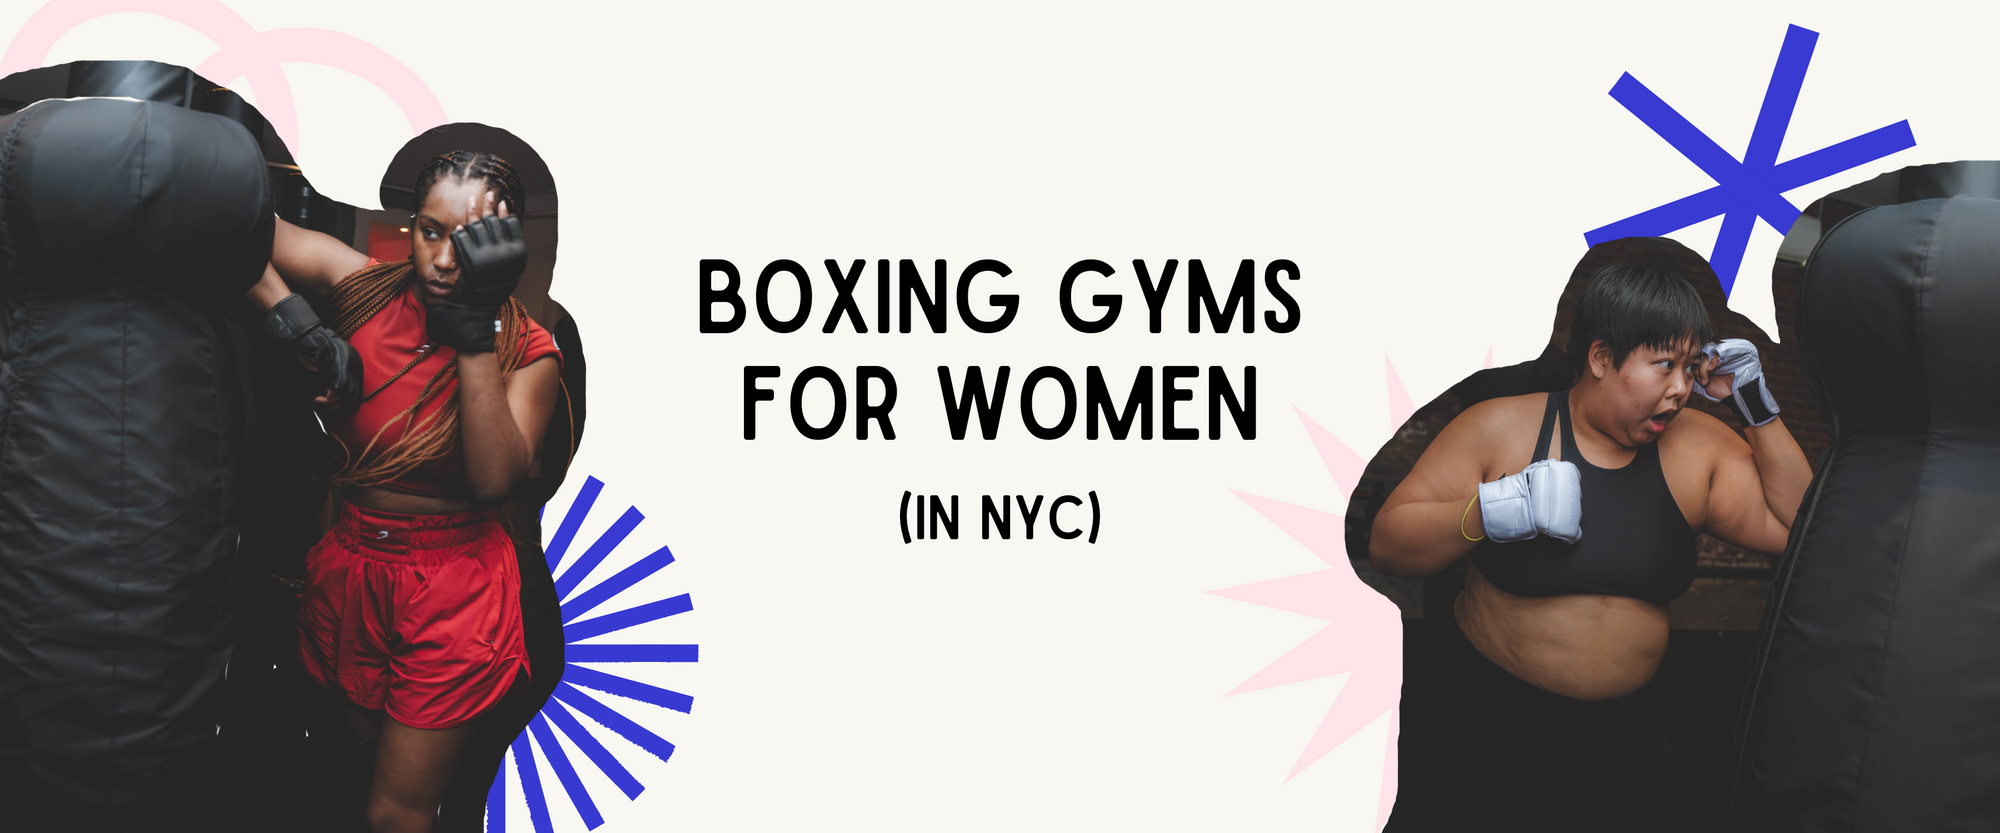 BEST BOXING GYMS IN NYC